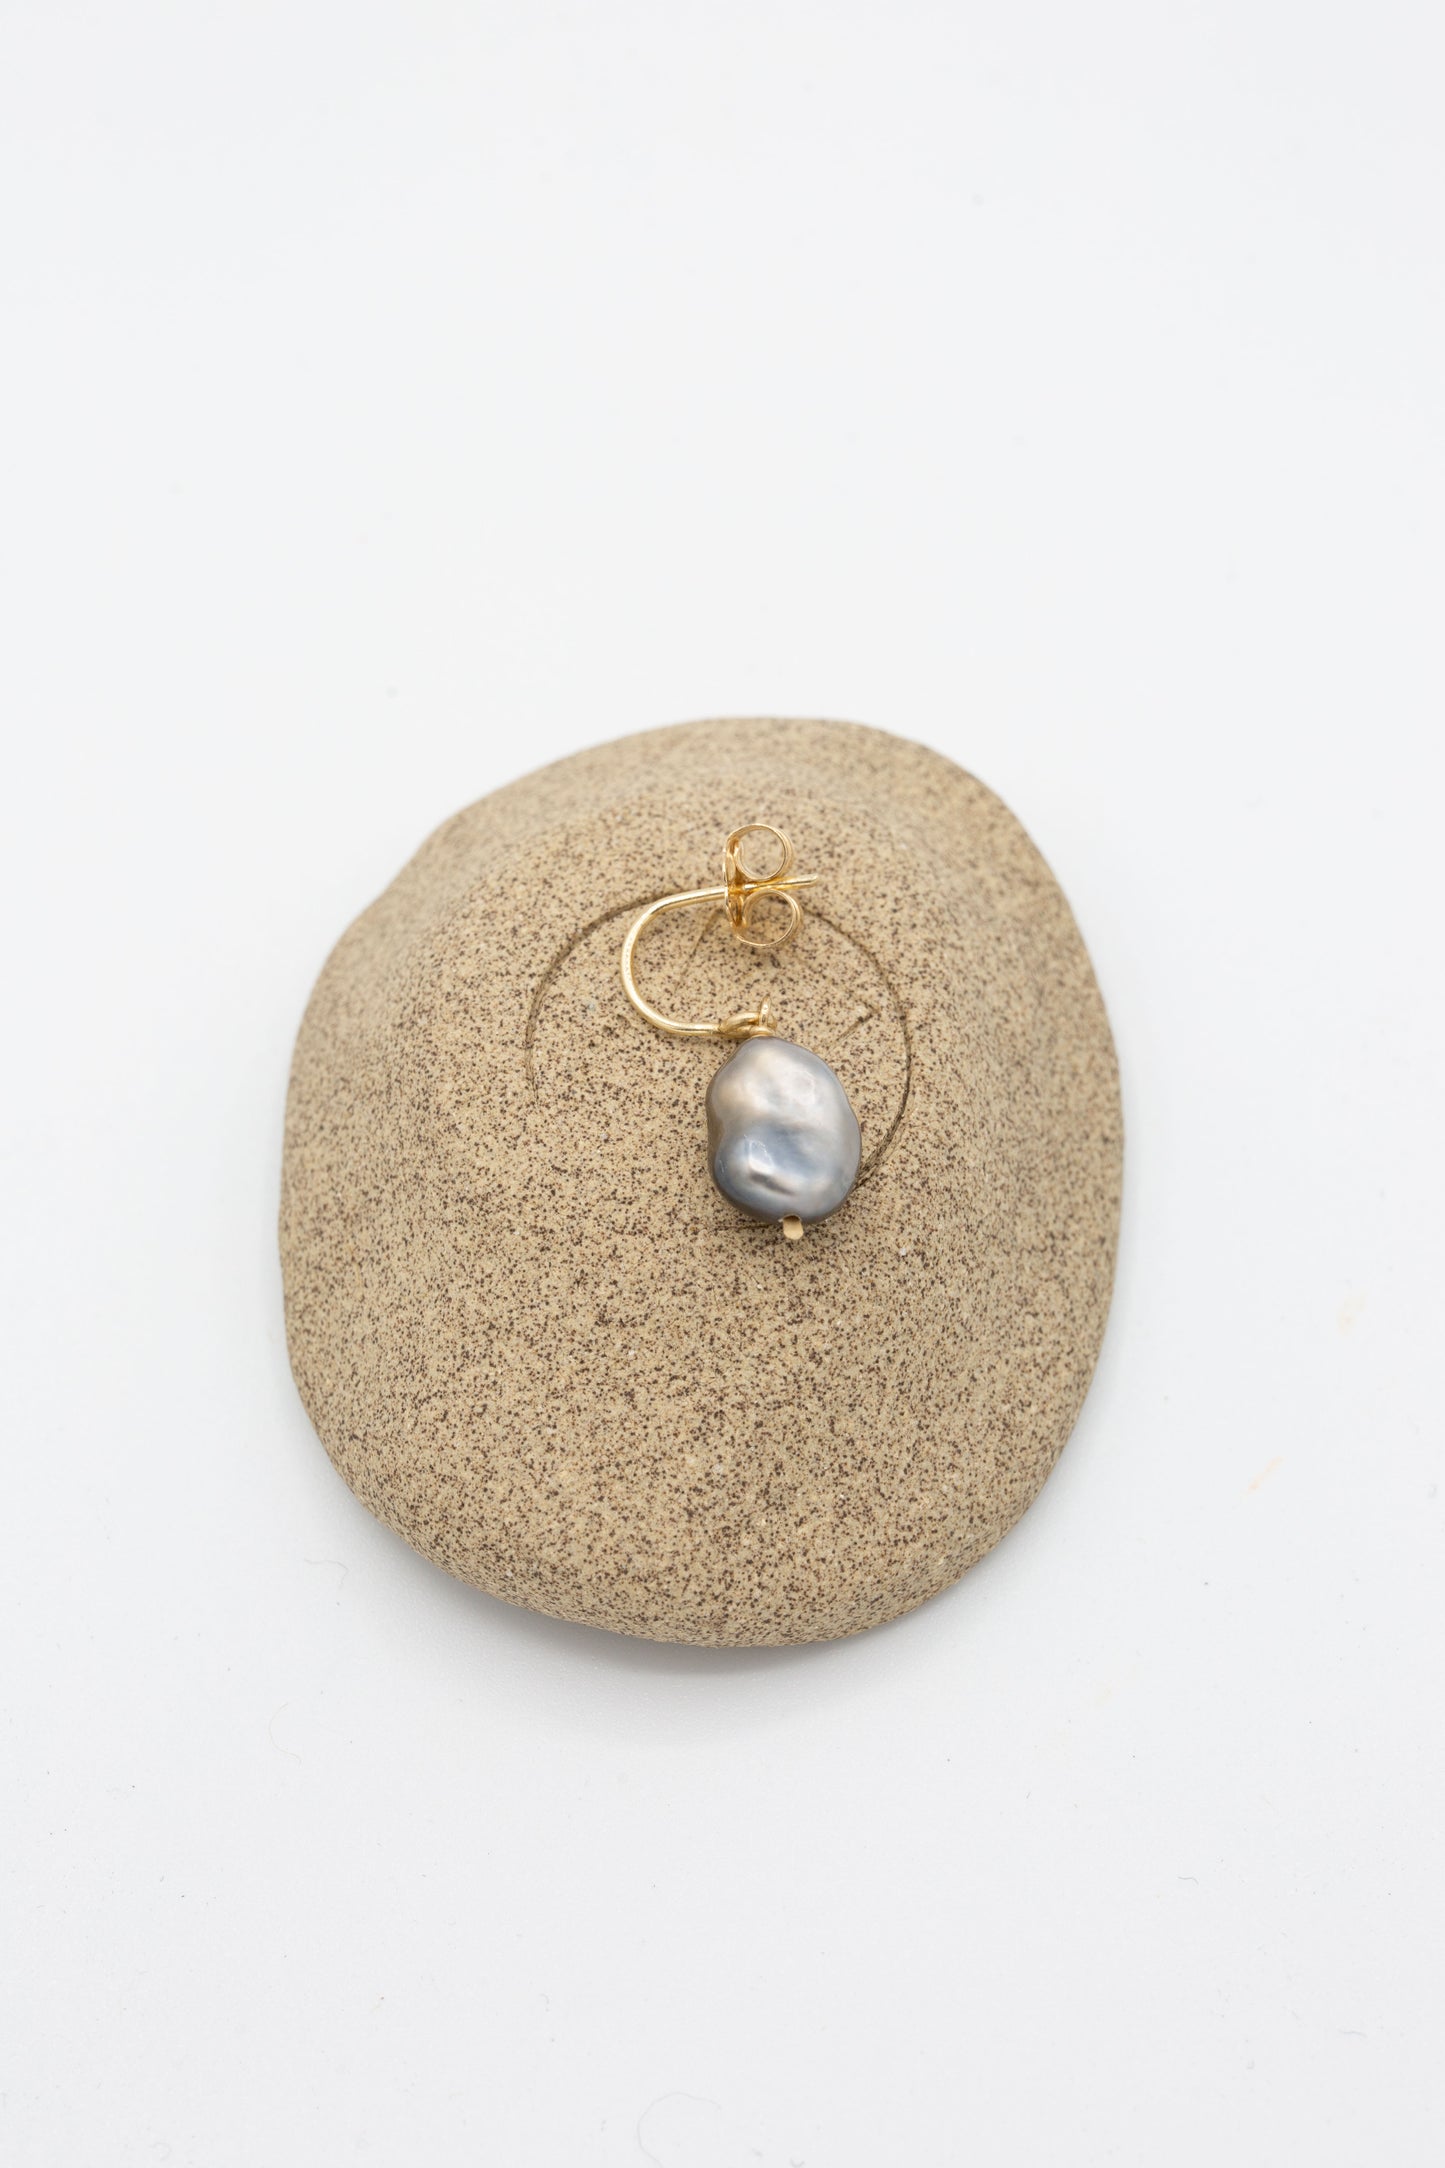 A Mary MacGill 14K Crescent Charm Earrings in Grey Keshi Pearl adorned with a Keshi pearl. Laying on a beige colored stone.